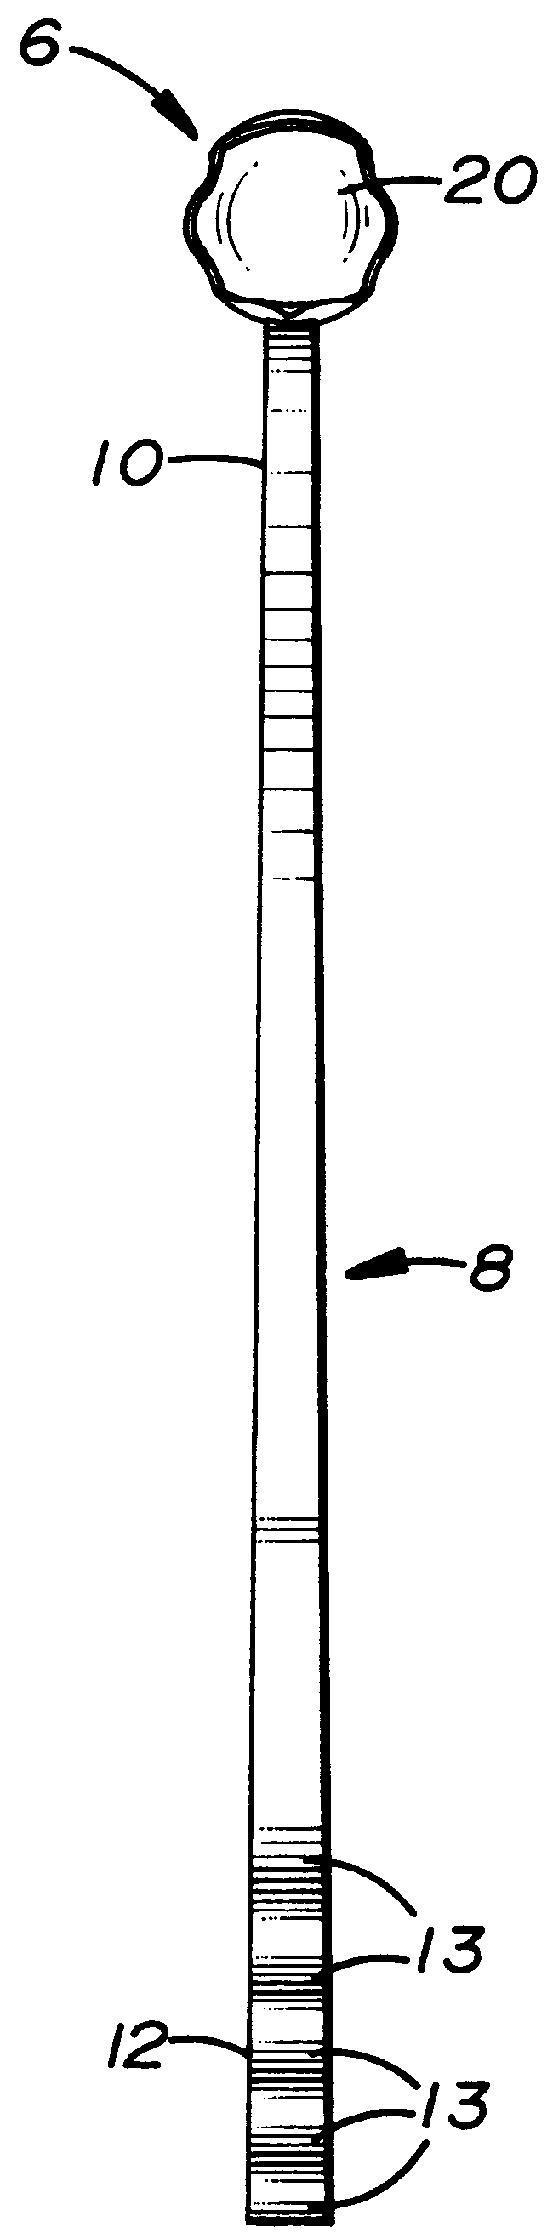 Ball throwing apparatus and method